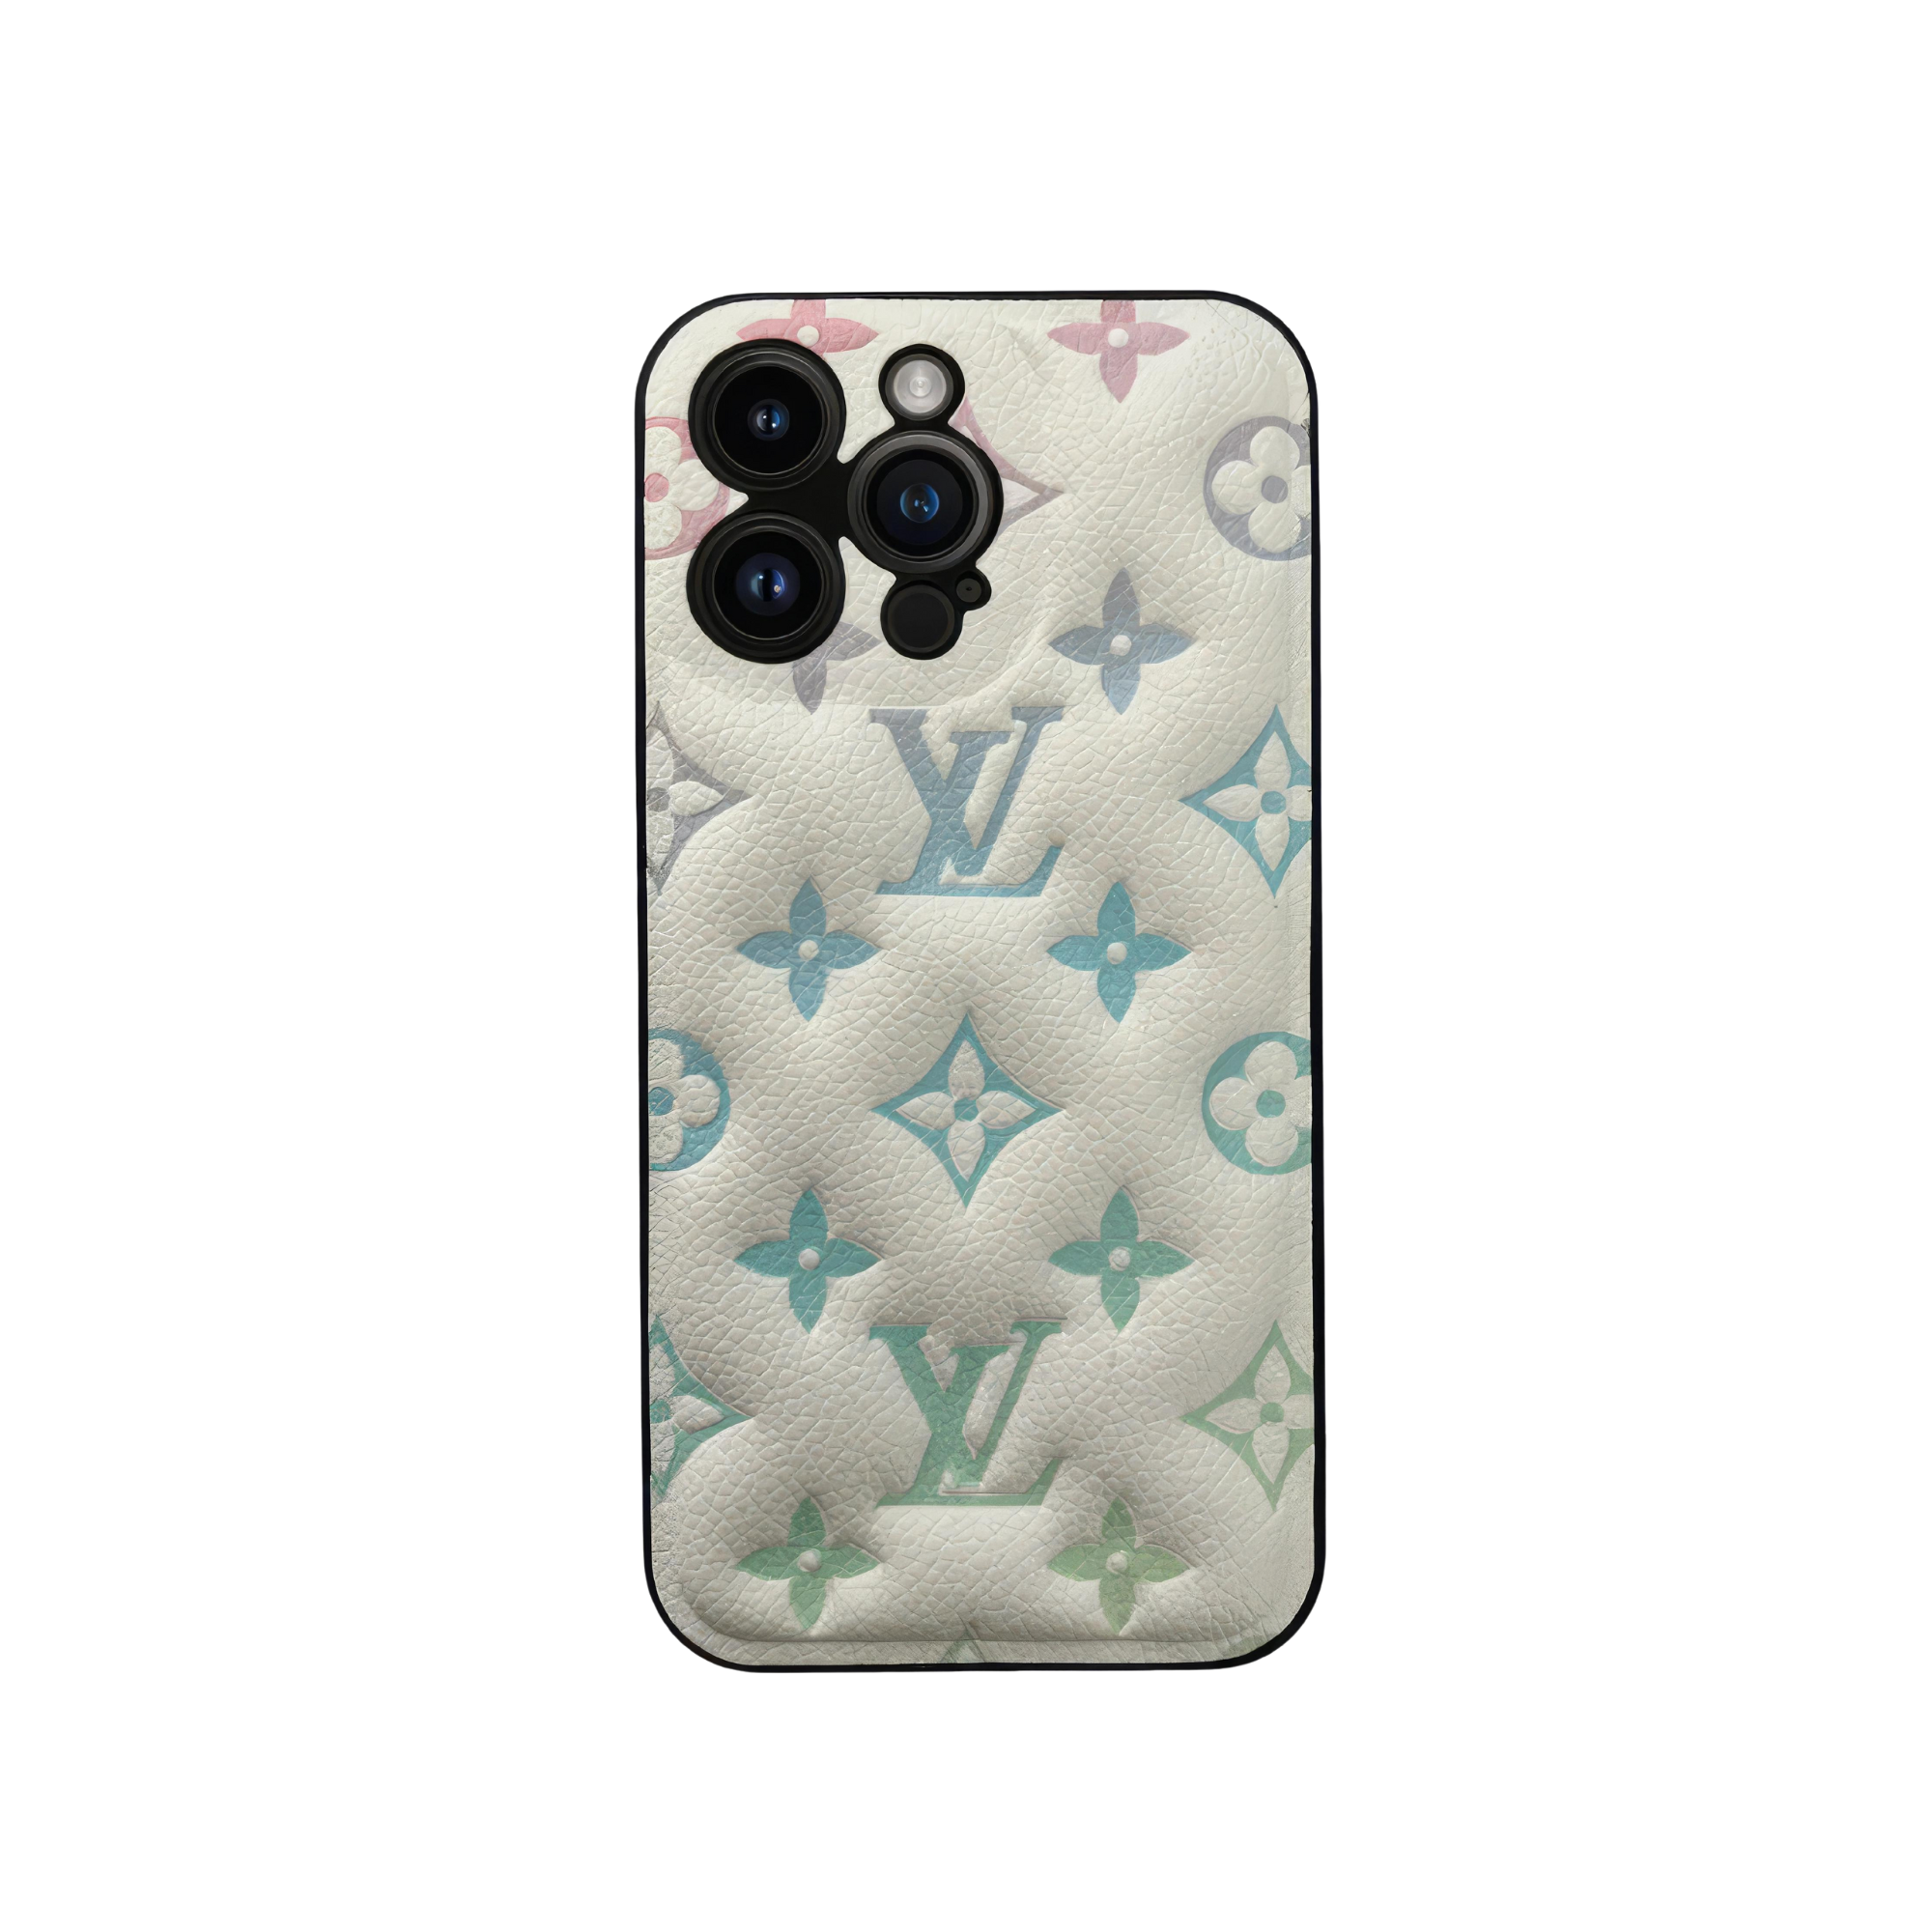 Louis Vuitton smartphone case with a holographic pattern that changes color